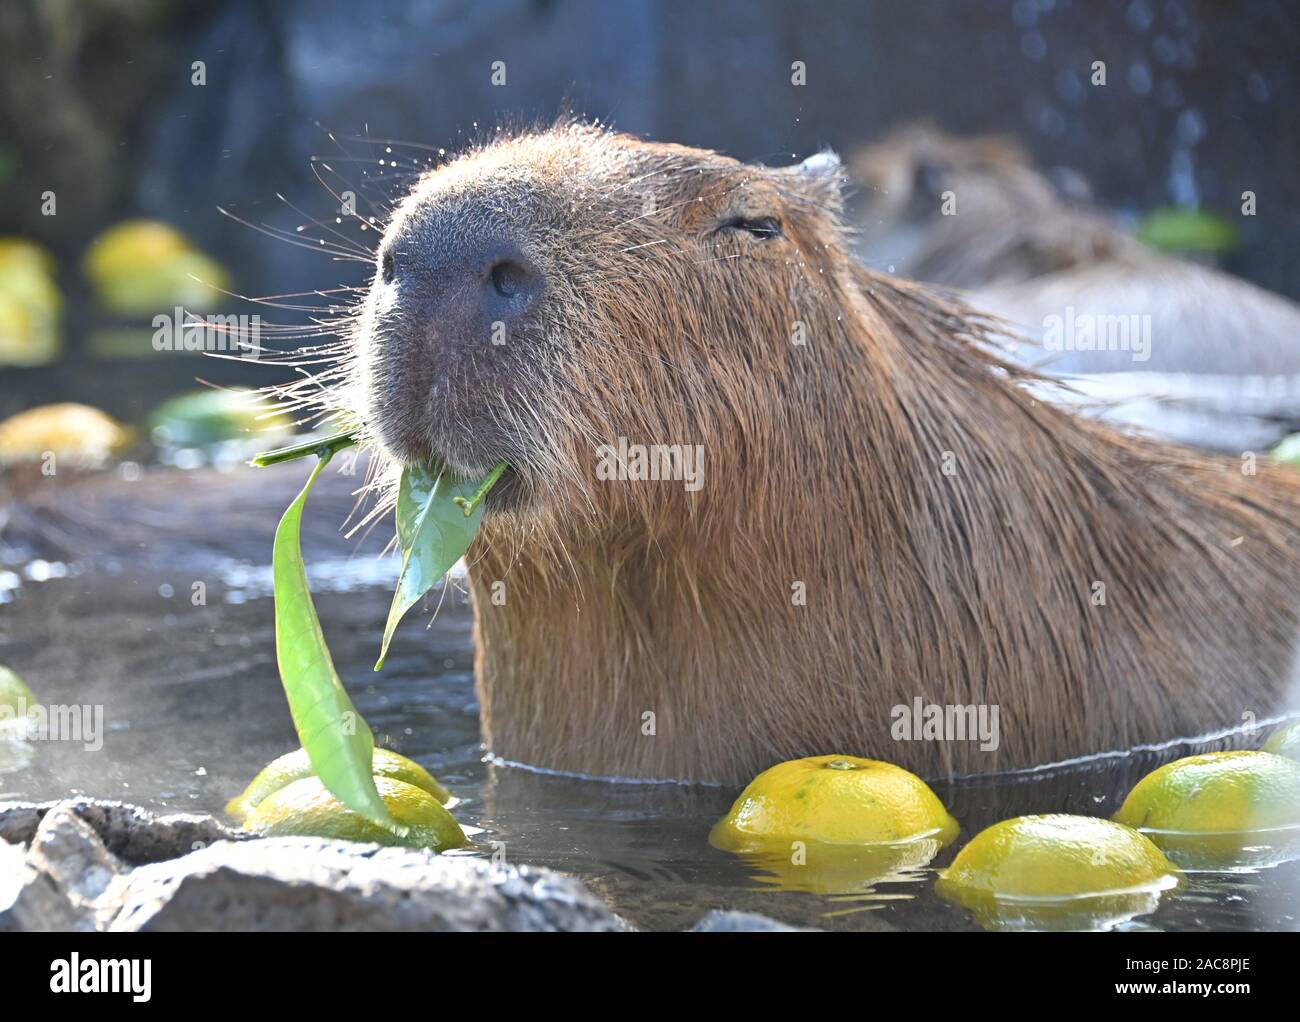 https://c8.alamy.com/comp/2AC8PJE/ito-japan-1st-dec-2019-an-adorable-water-hog-enjoys-an-open-air-hot-sprint-in-izu-cactus-zoological-park-near-city-of-ito-southwest-of-tokyo-on-sunday-december-1-2019-with-the-start-of-the-year-of-the-rat-in-the-ancient-chinese-zodiac-is-just-a-month-away-the-water-hog-also-known-as-capybara-the-largest-rodent-in-the-world-and-a-closer-relative-of-rats-has-become-a-popular-attraction-in-the-park-credit-natsuki-sakaiafloalamy-live-news-2AC8PJE.jpg